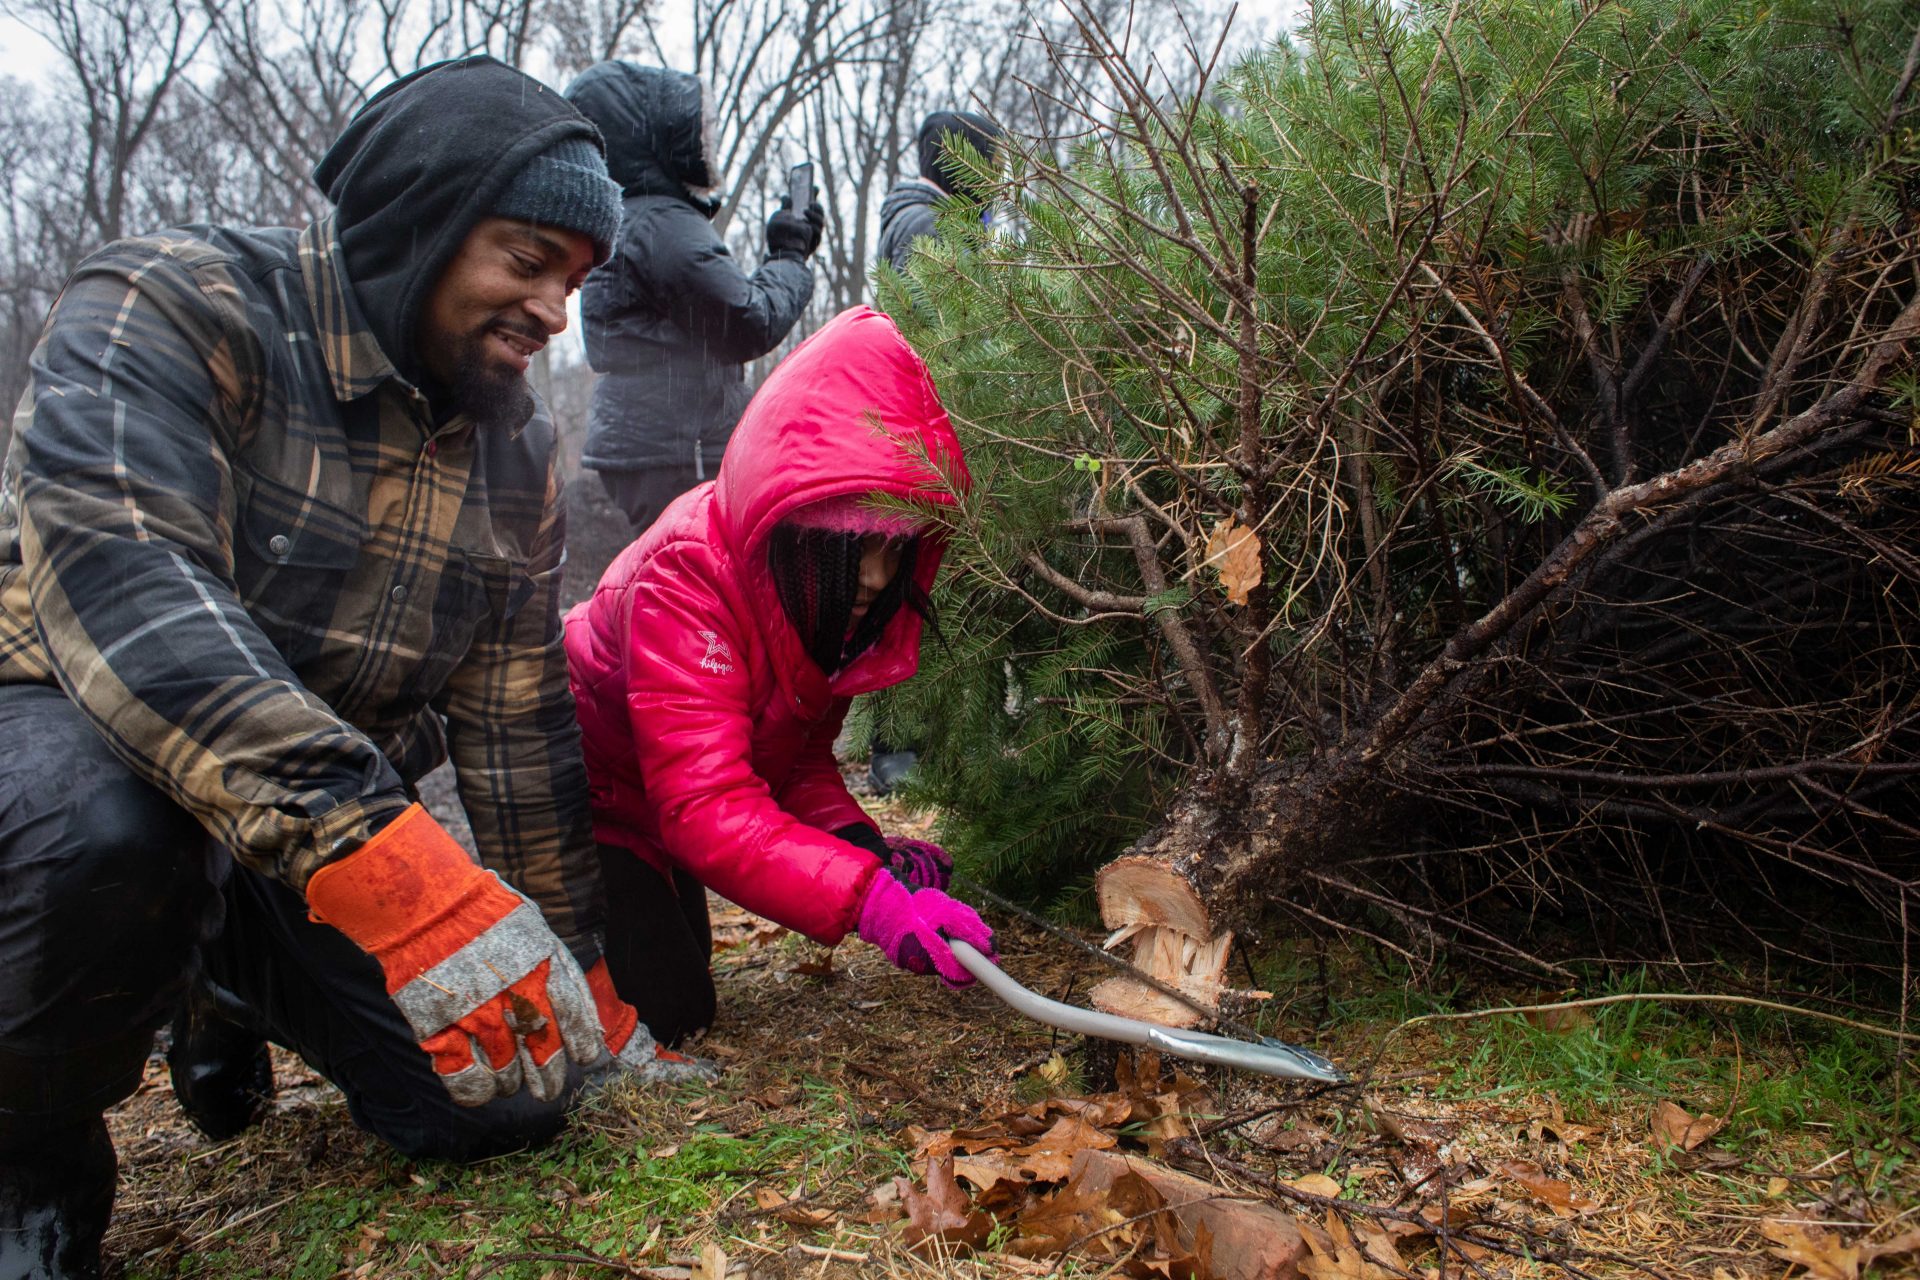 Gabbi Lynard (right), age 9, of Cherry Hill, New Jersey helps her father Anthony Lynard (left) cut down their Christmas tree at Linvilla Orchards in Media, Pennsylvania on Sunday.